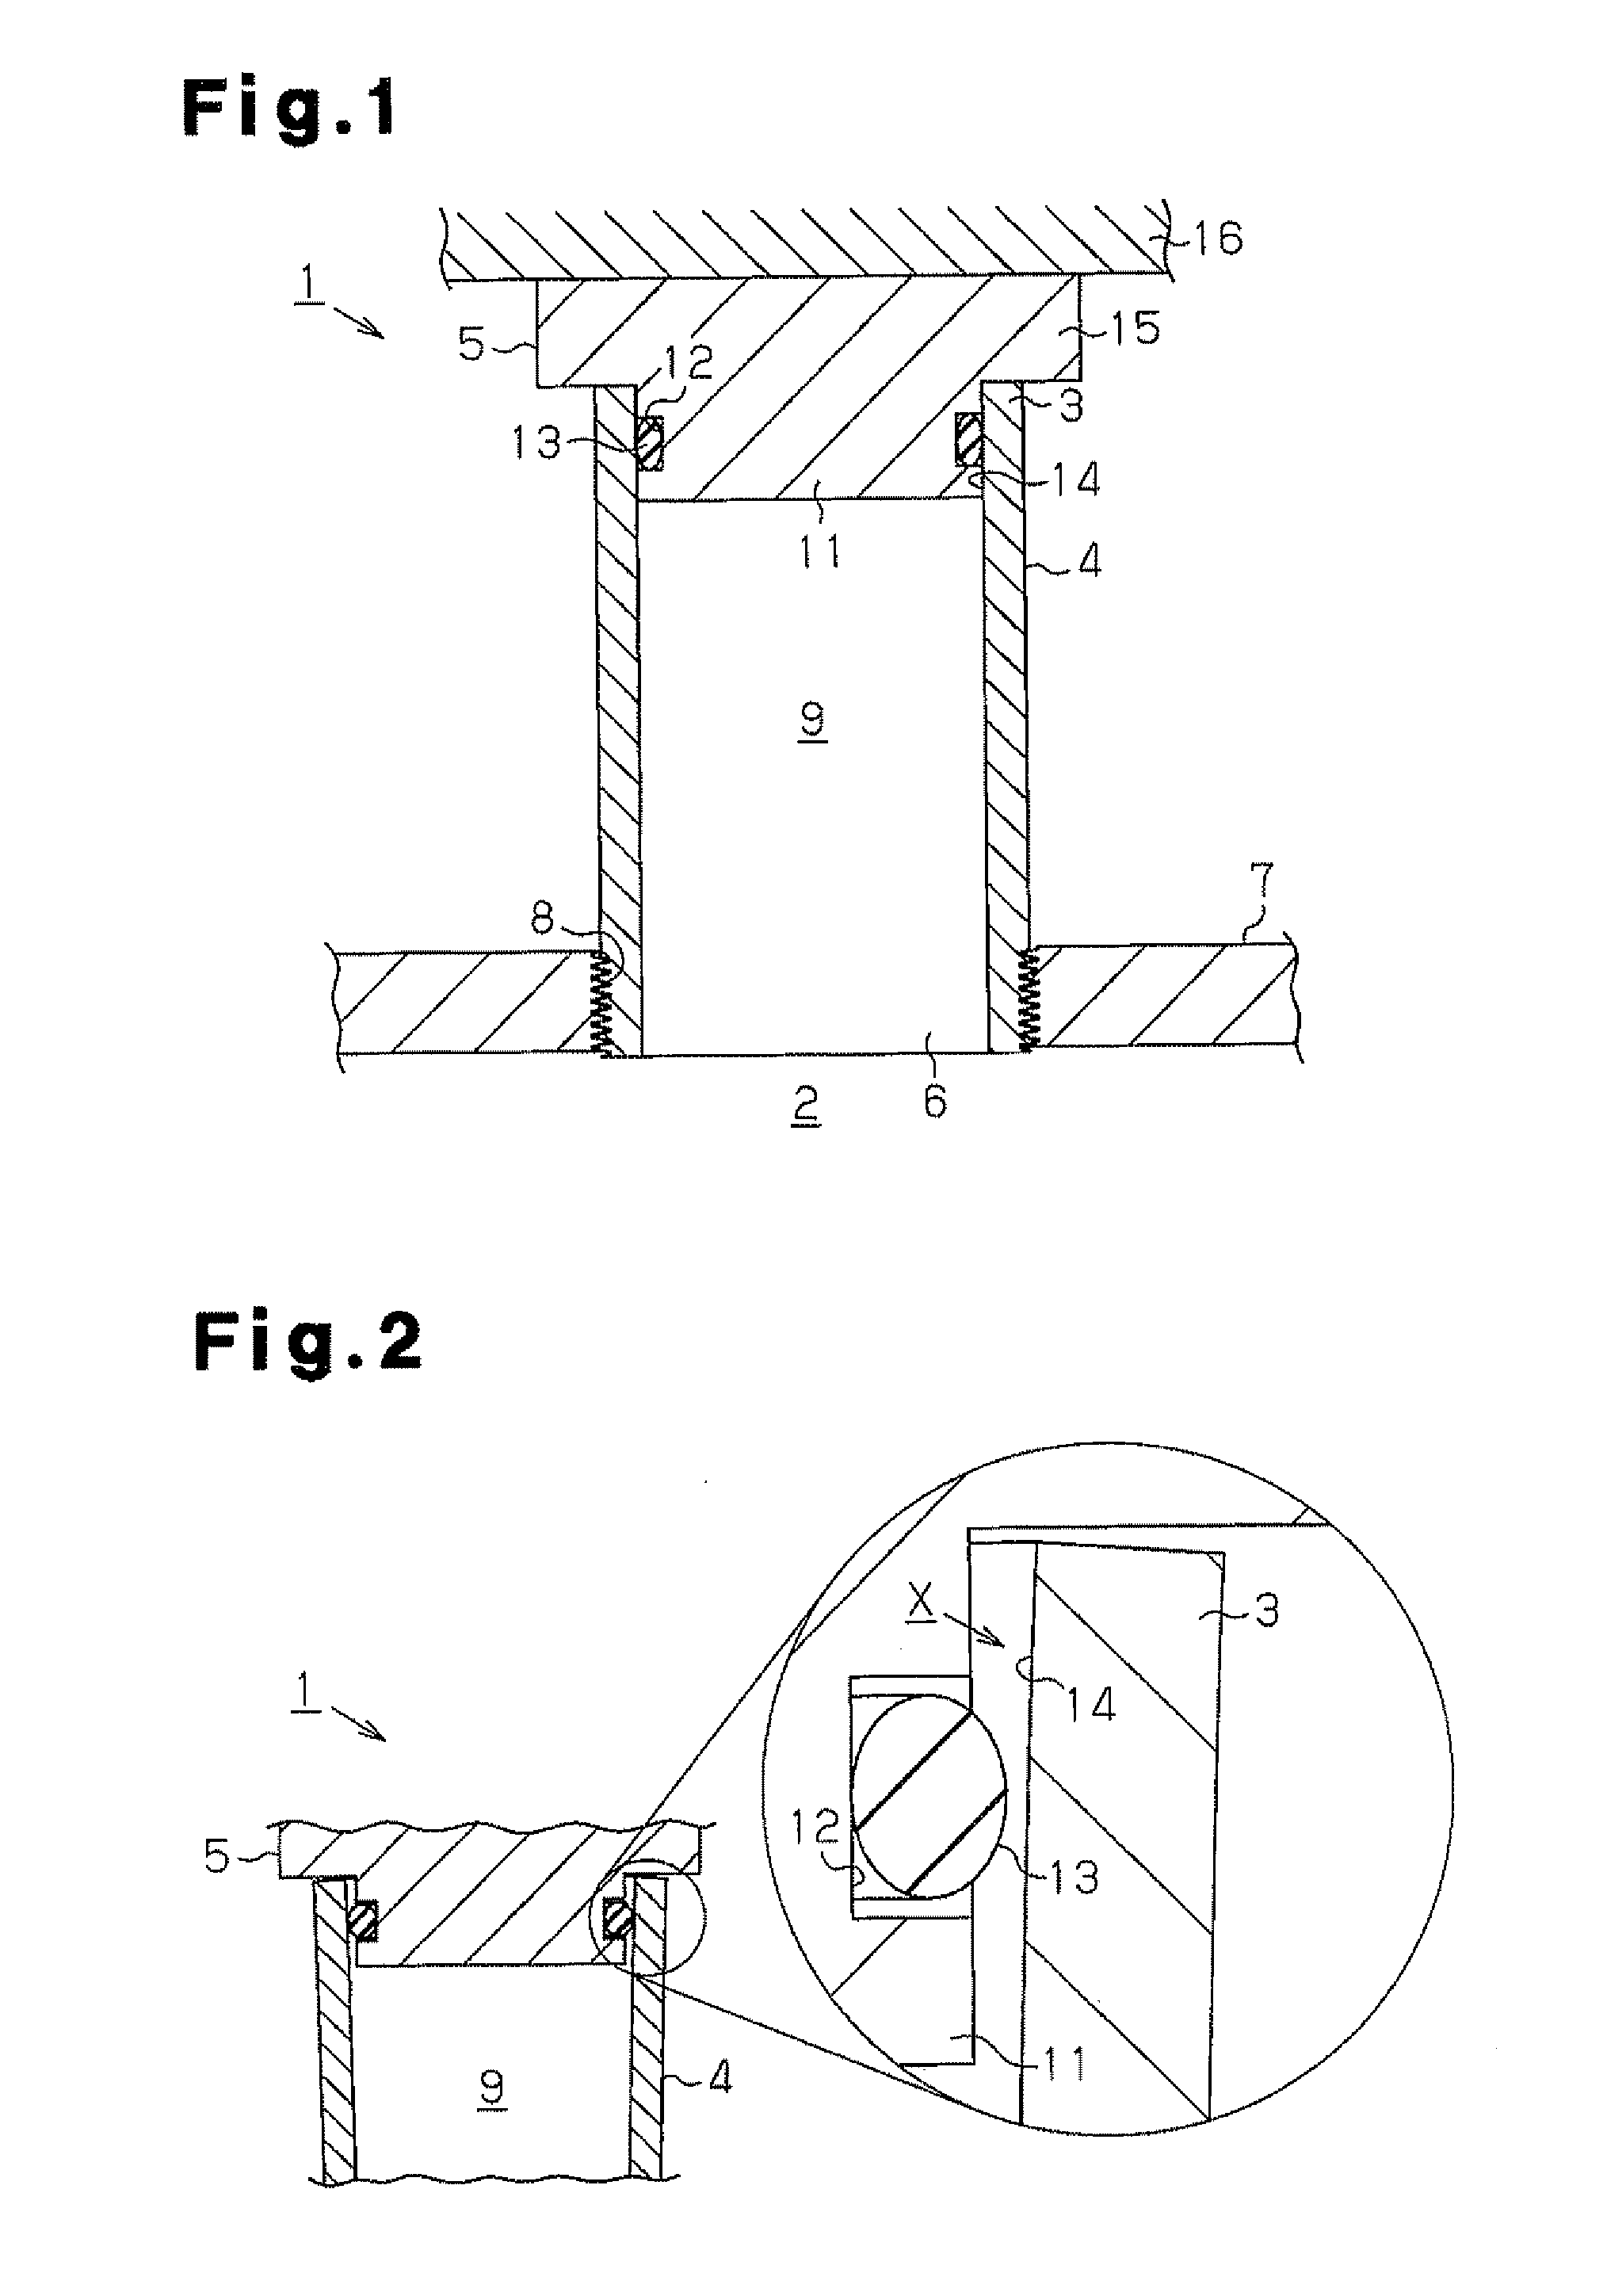 Safety valve and electromagnetic valve